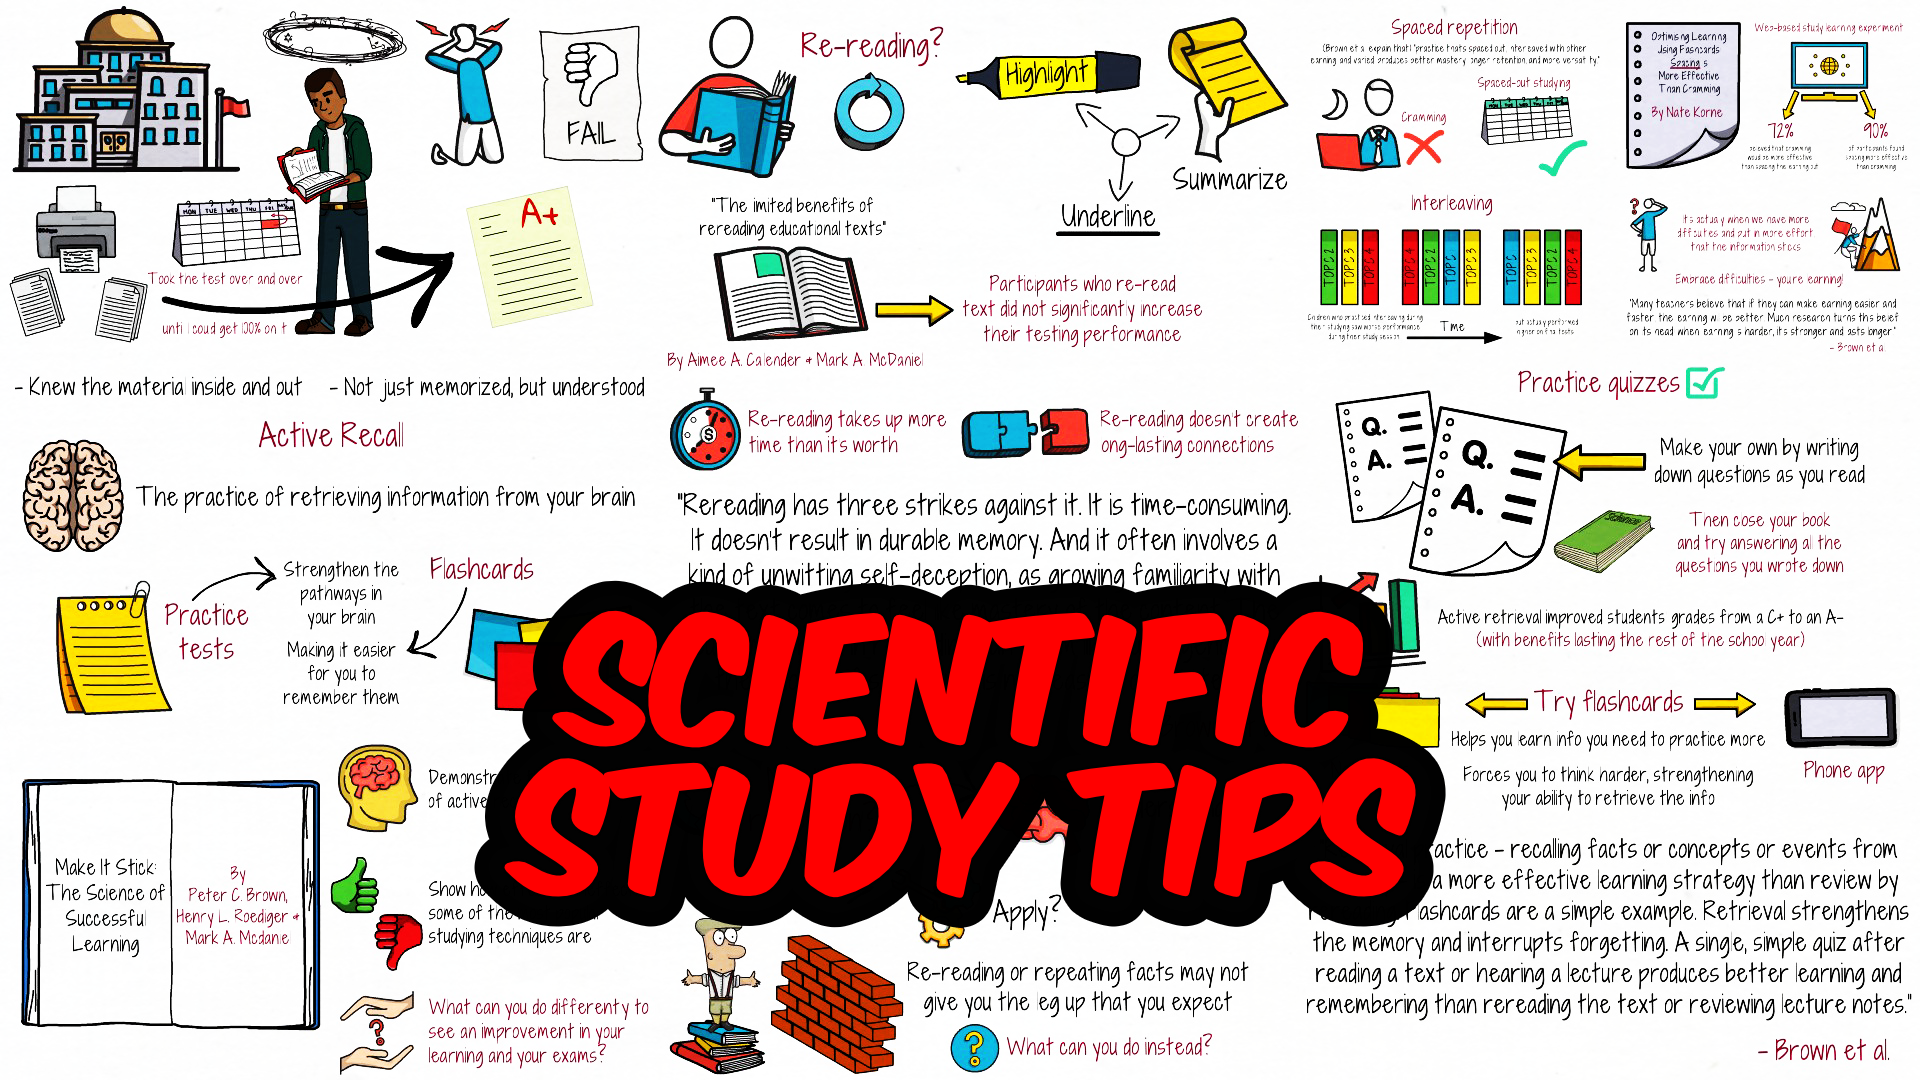 How to Study for Exams Evidence-Based tips